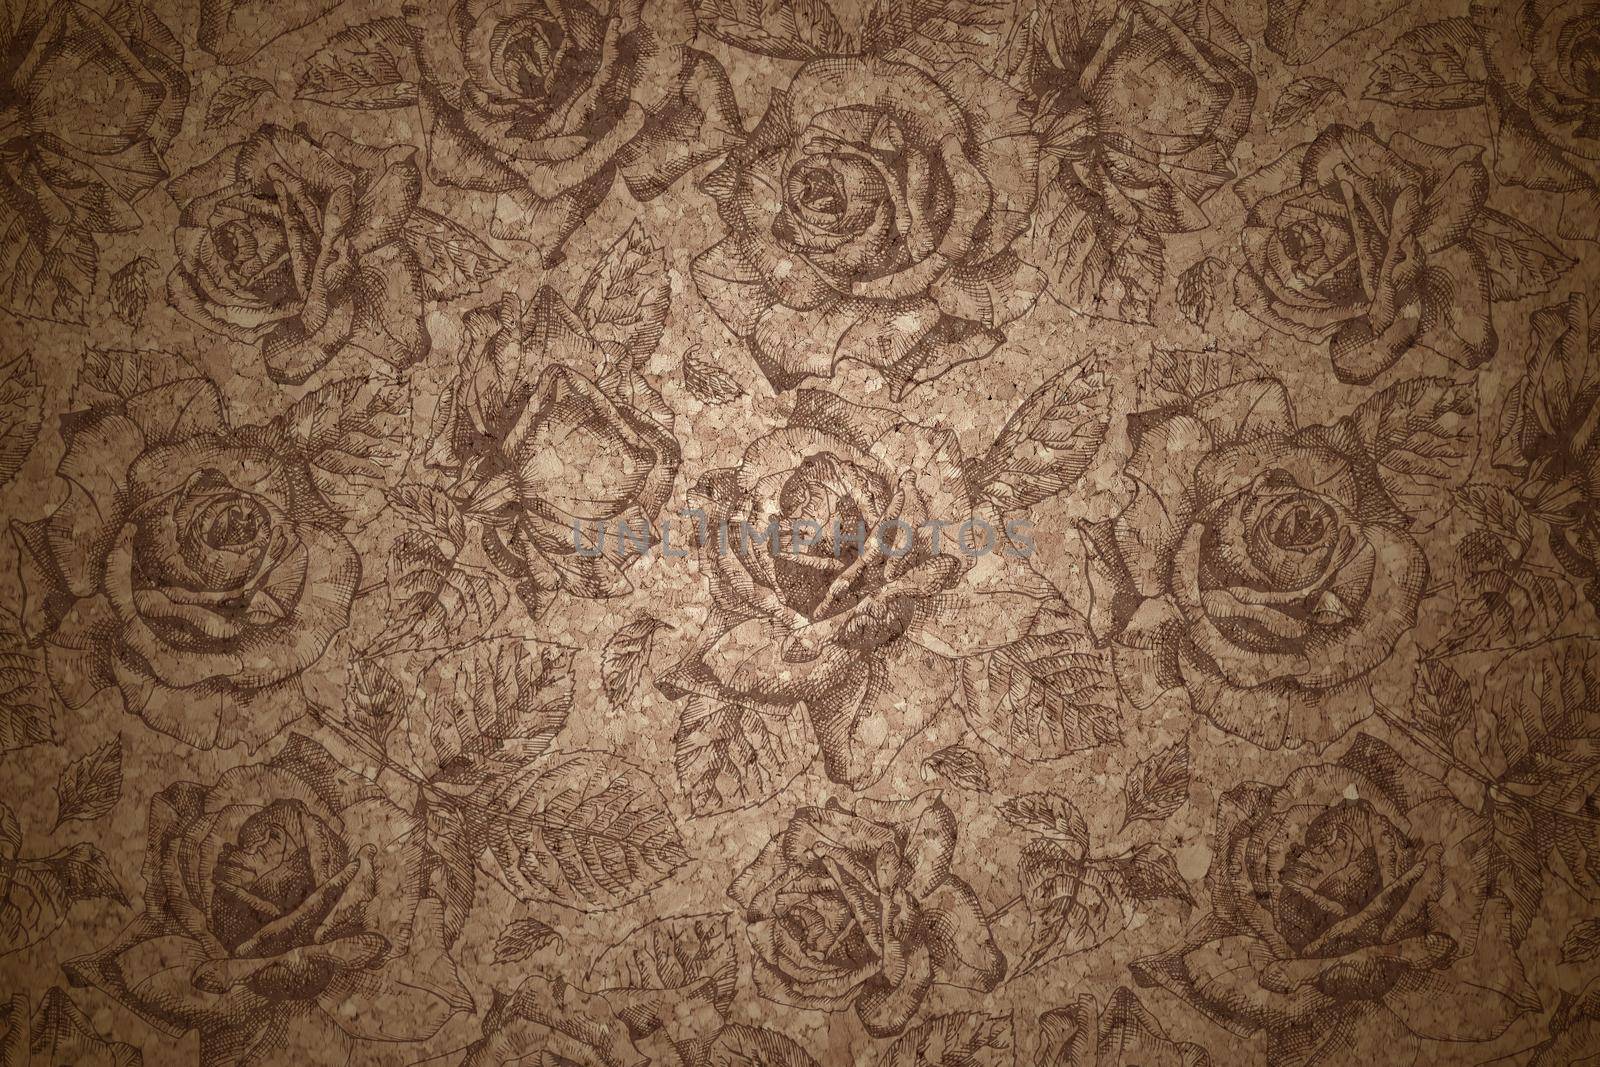 Fine Art Natural cork Textures with Hand drawn roses Flower overlay. Portrait Photo Floral Textures Backdrop Digital Studio Background, Best for cute family photos, atmospheric newborn designs by zimages